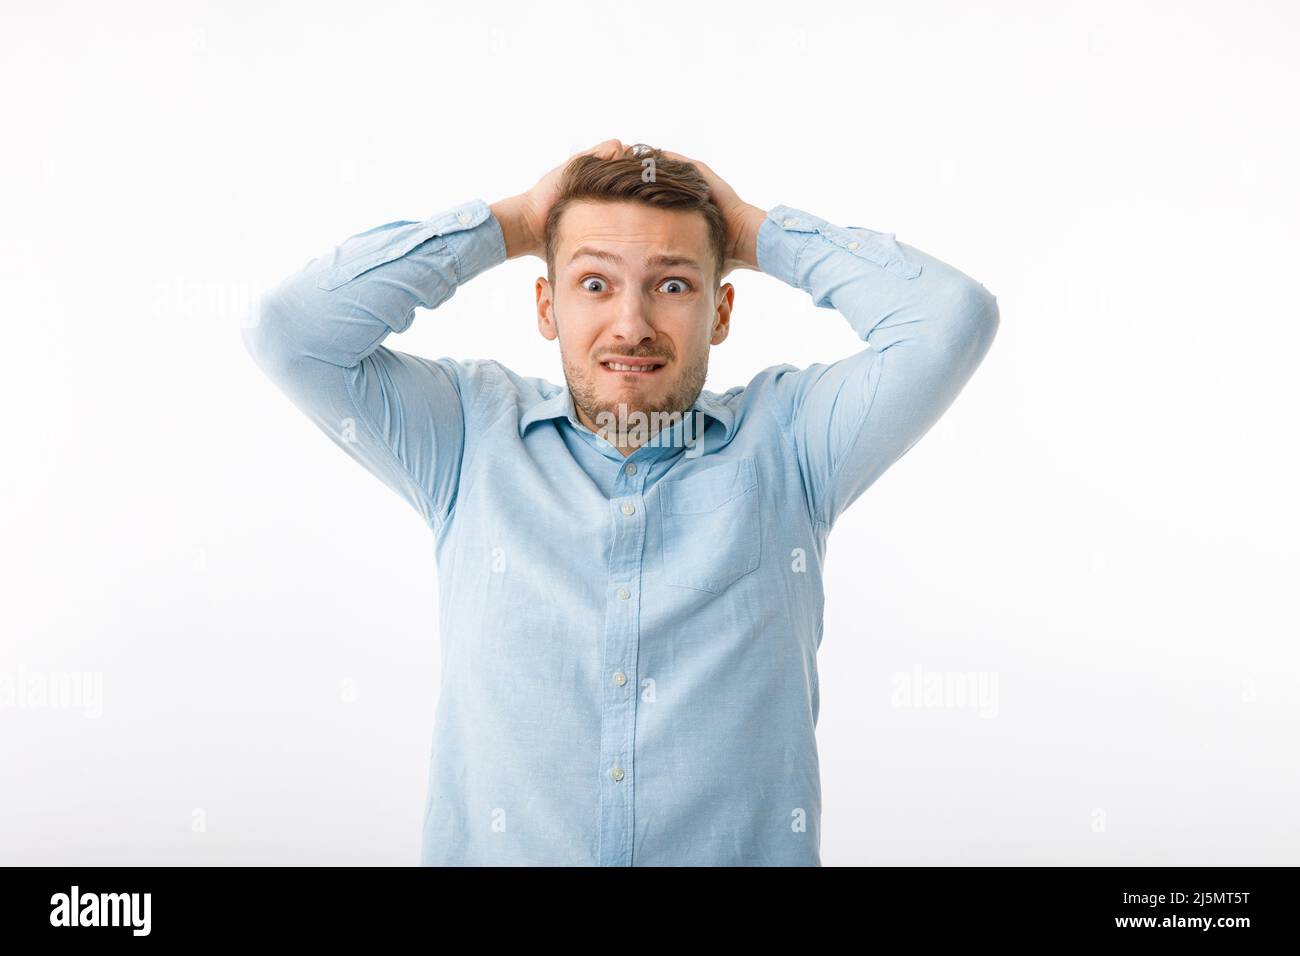 Portrait of a man in a desperate situation. The man is extremely confused and alarmed due to failure. Stock Photo